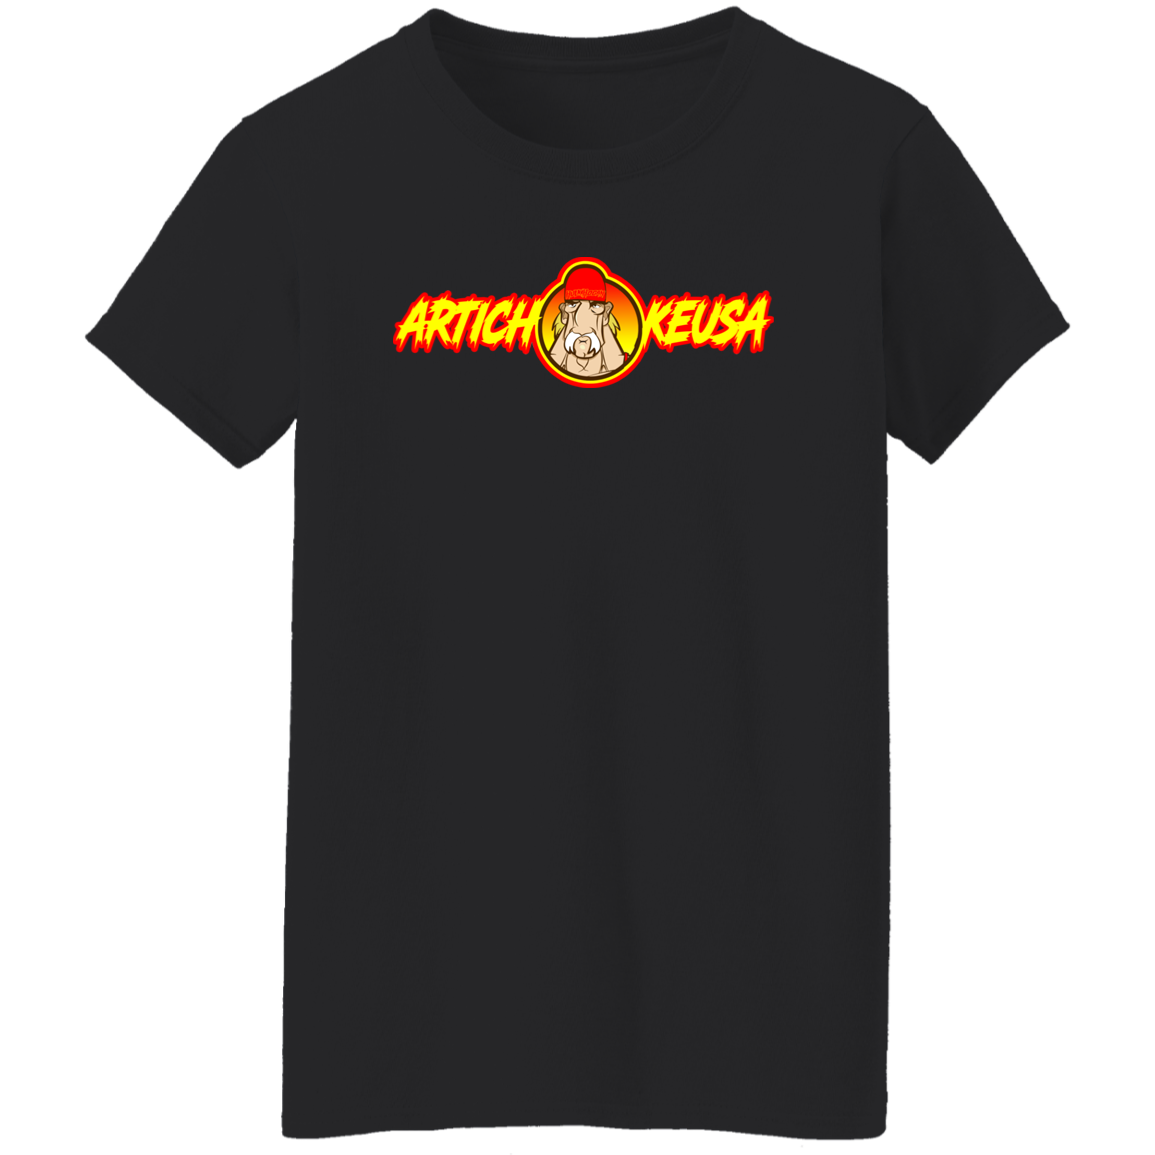 ArtichokeUSA Character and Font Design. Let’s Create Your Own Design Today. Fan Art. The Hulkster. Ladies' 5.3 oz. T-Shirt